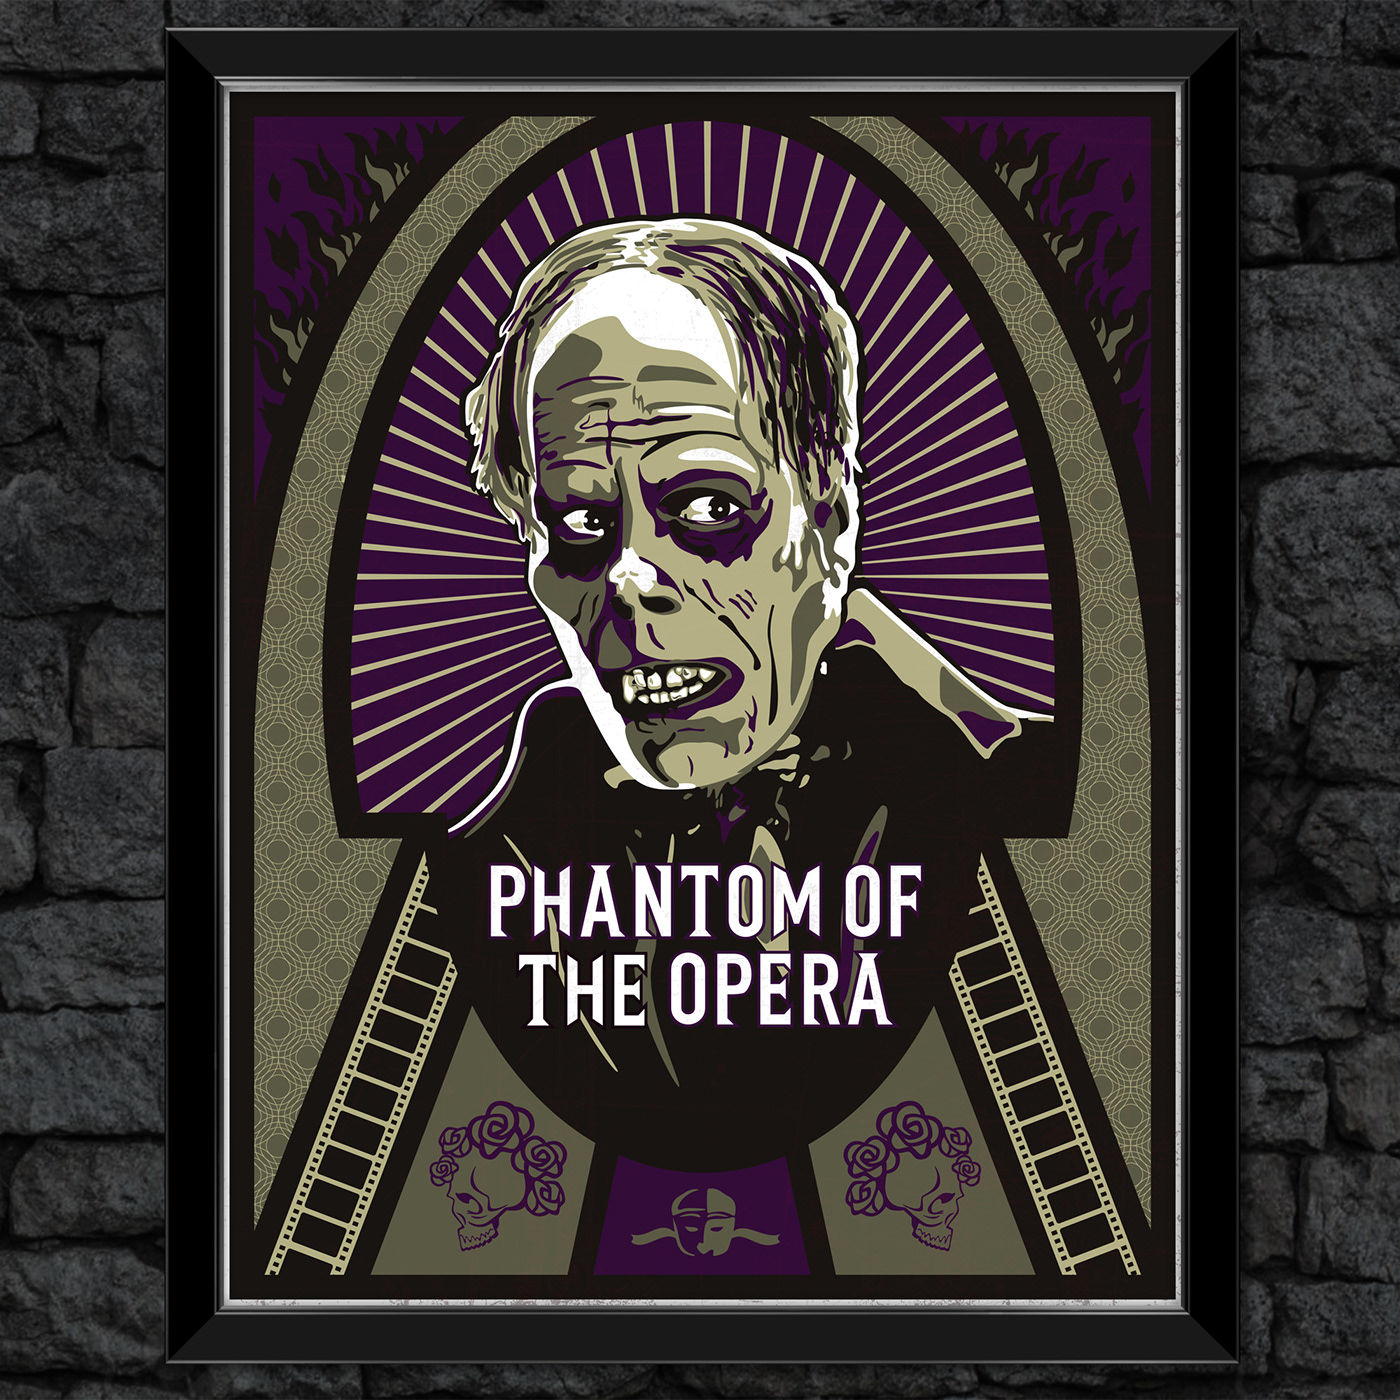 Universal Monsters classic cinema prints and posters available though my Etsy store.